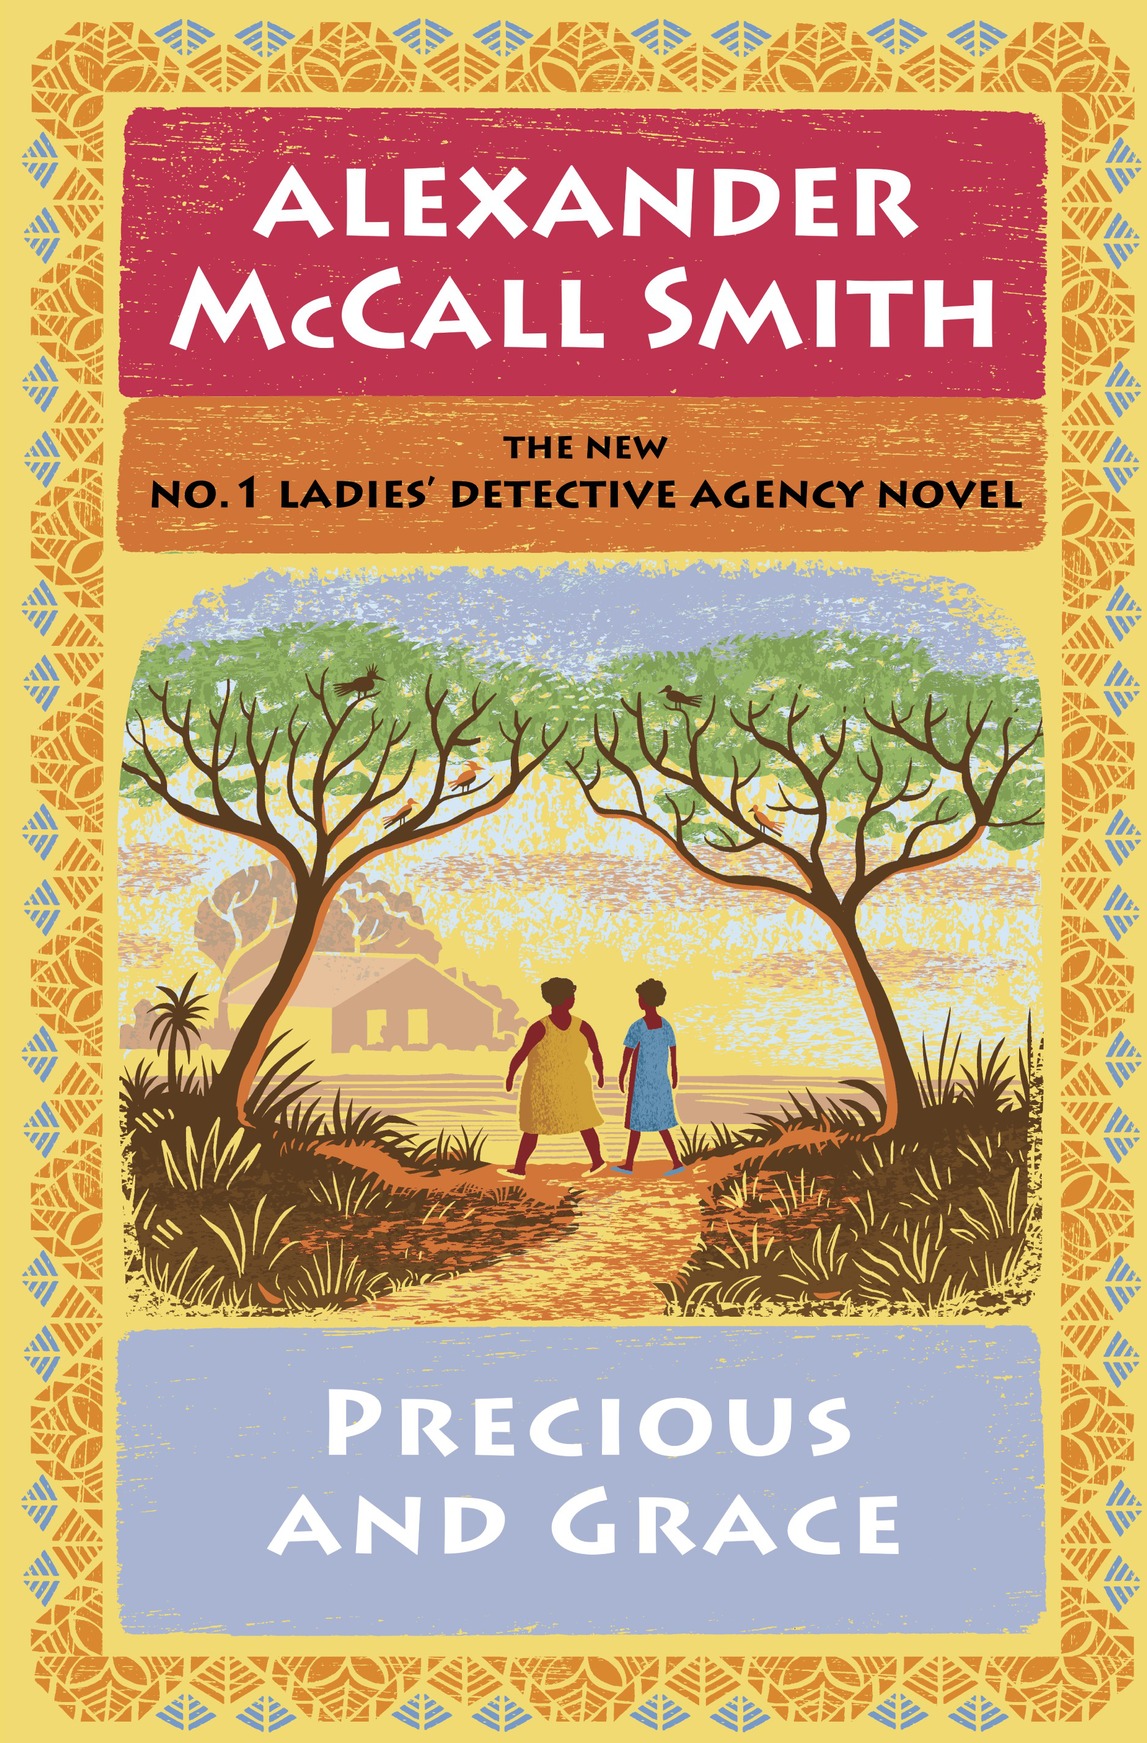 Precious and Grace (2016) by Alexander McCall Smith